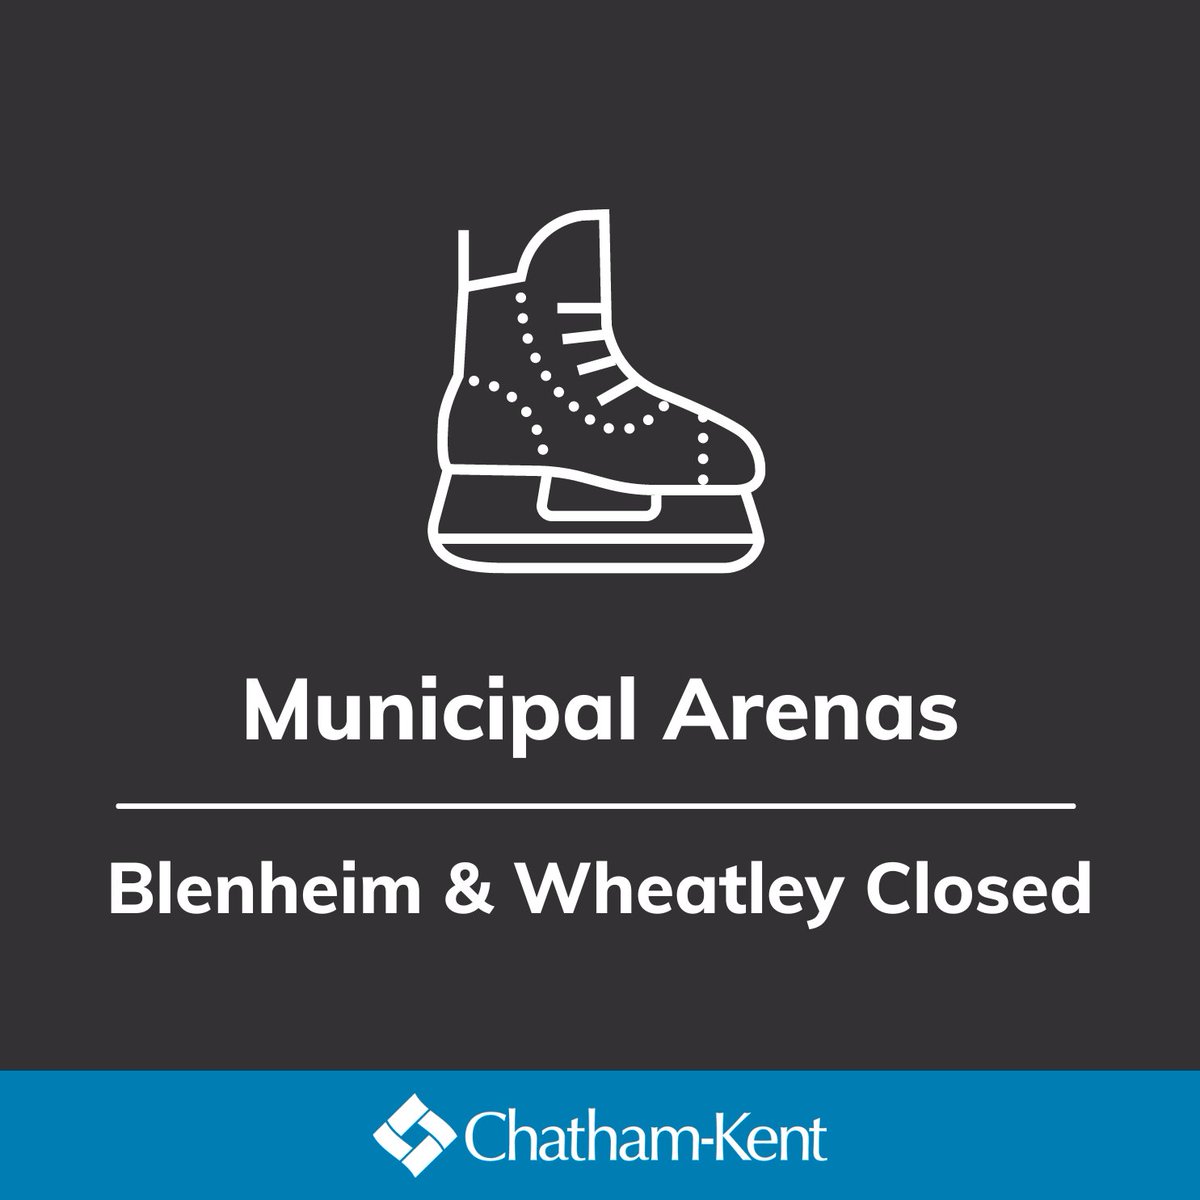 ‼️The Blenheim and Wheatley arenas are currently closed due to power outages. ✳️ NOTE: If the power is still out at 4:00 pm, we will be cancelling bookings for the night and notifying the user groups. #ckont